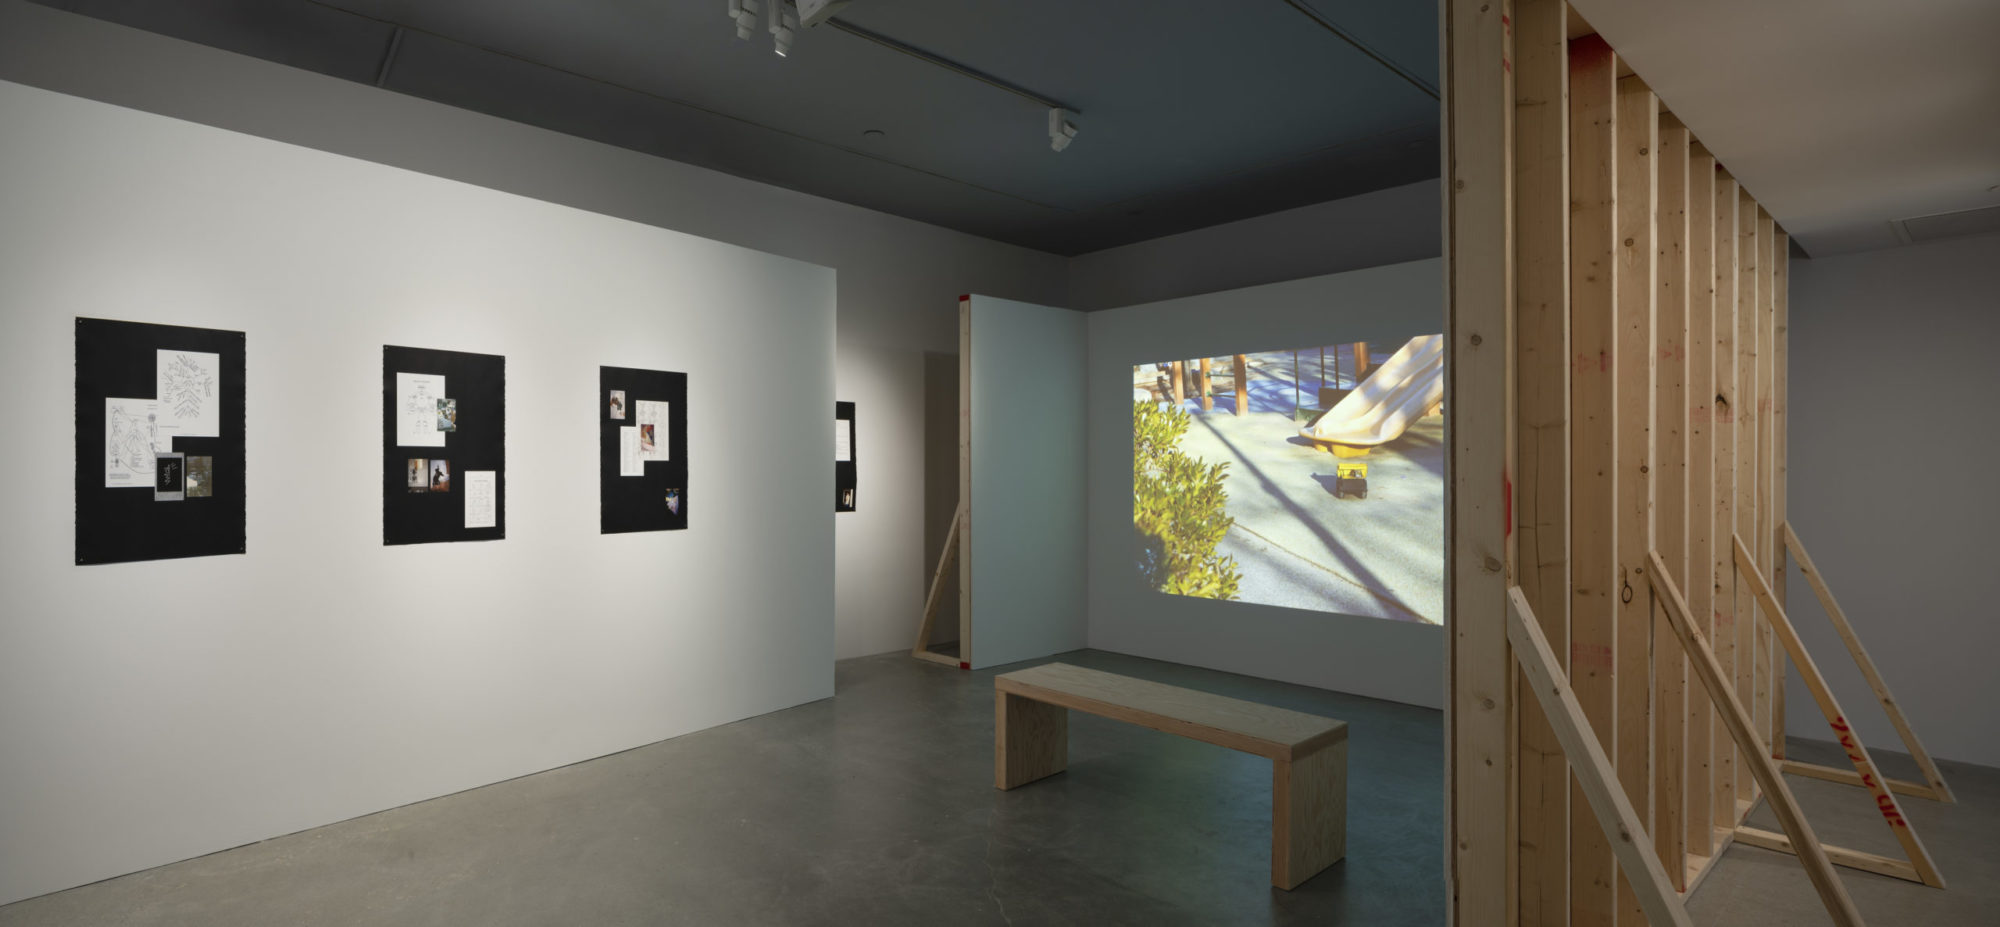 Gallery space showing vertical wooden construction beams, a wooden bench in front of a projected image of a children's playground slide, and a white gallery wall with works of art featuring pieces of ephemera upon black backgrounds